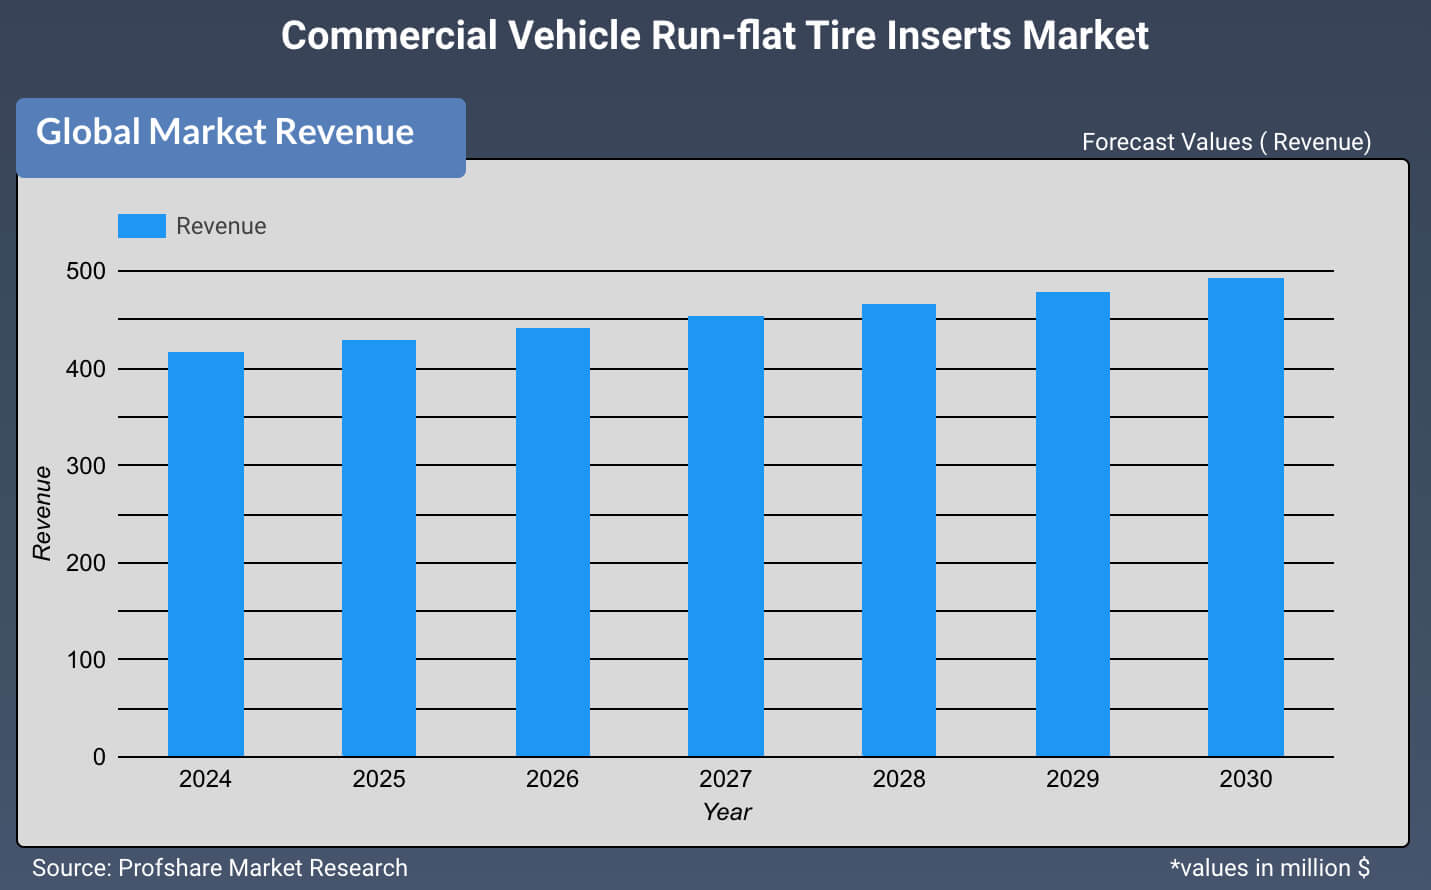 Commercial Vehicle Run-flat Tire Inserts Market